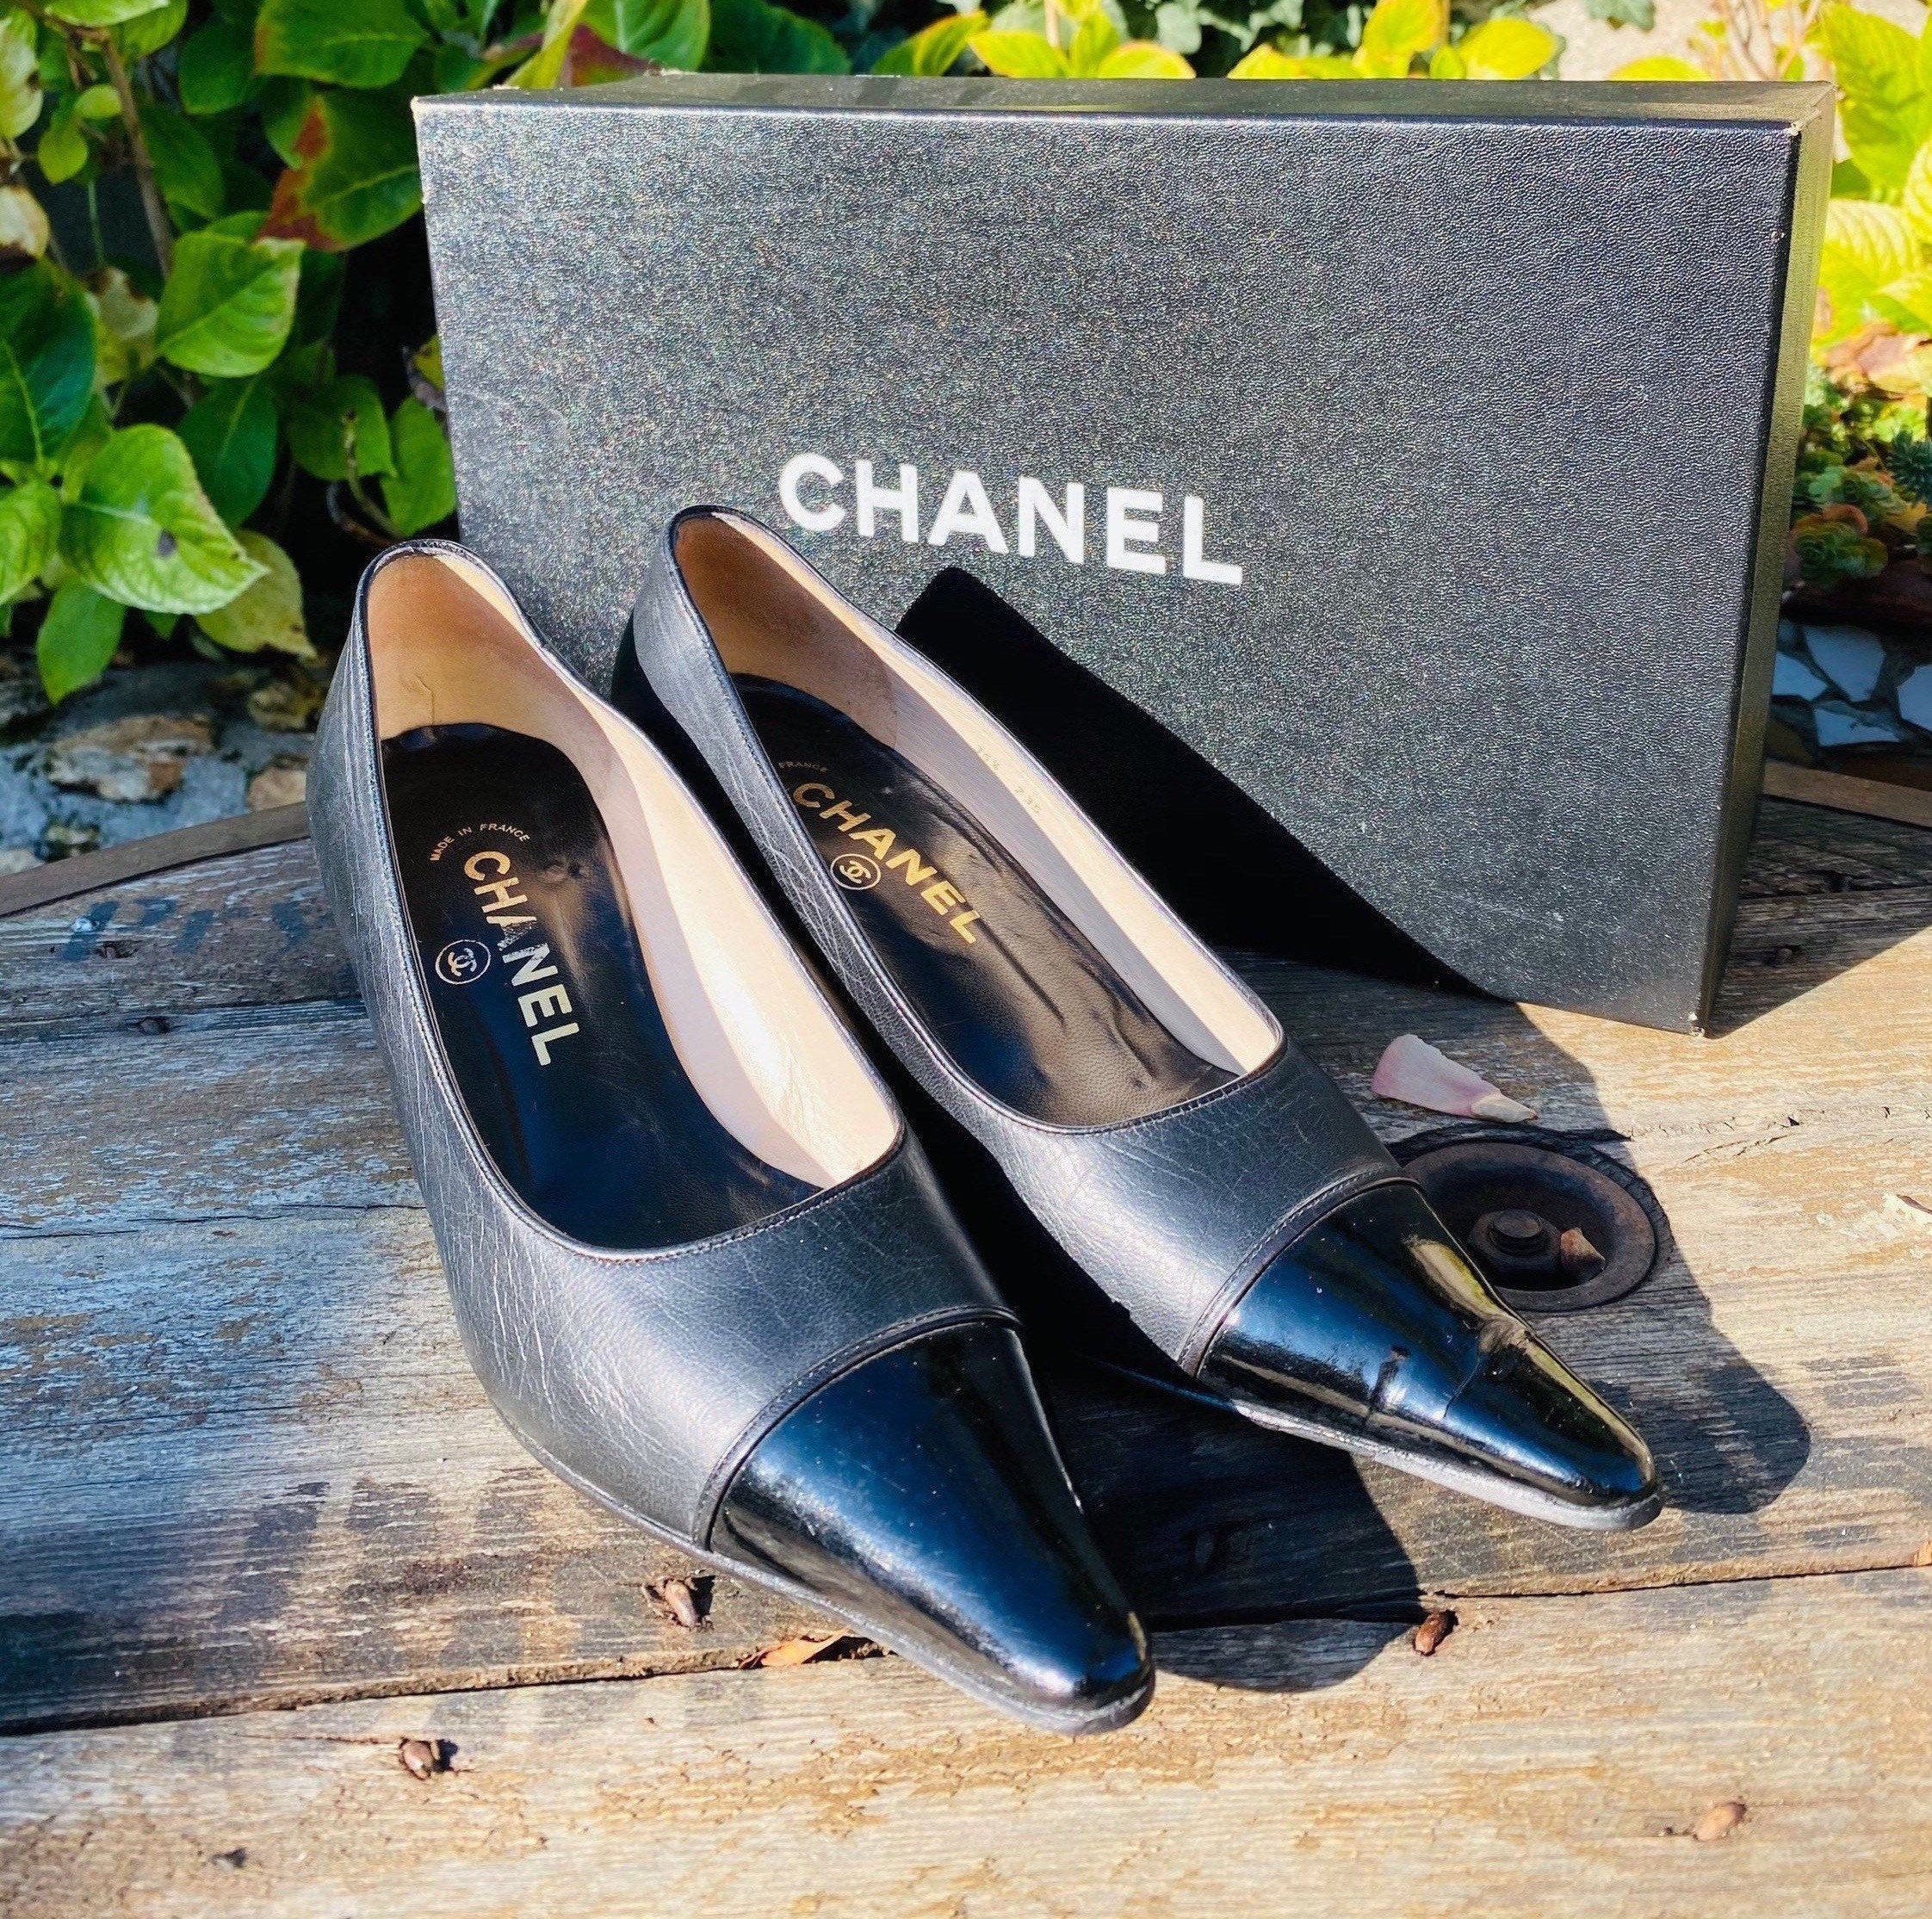 chanel spectator shoes 9